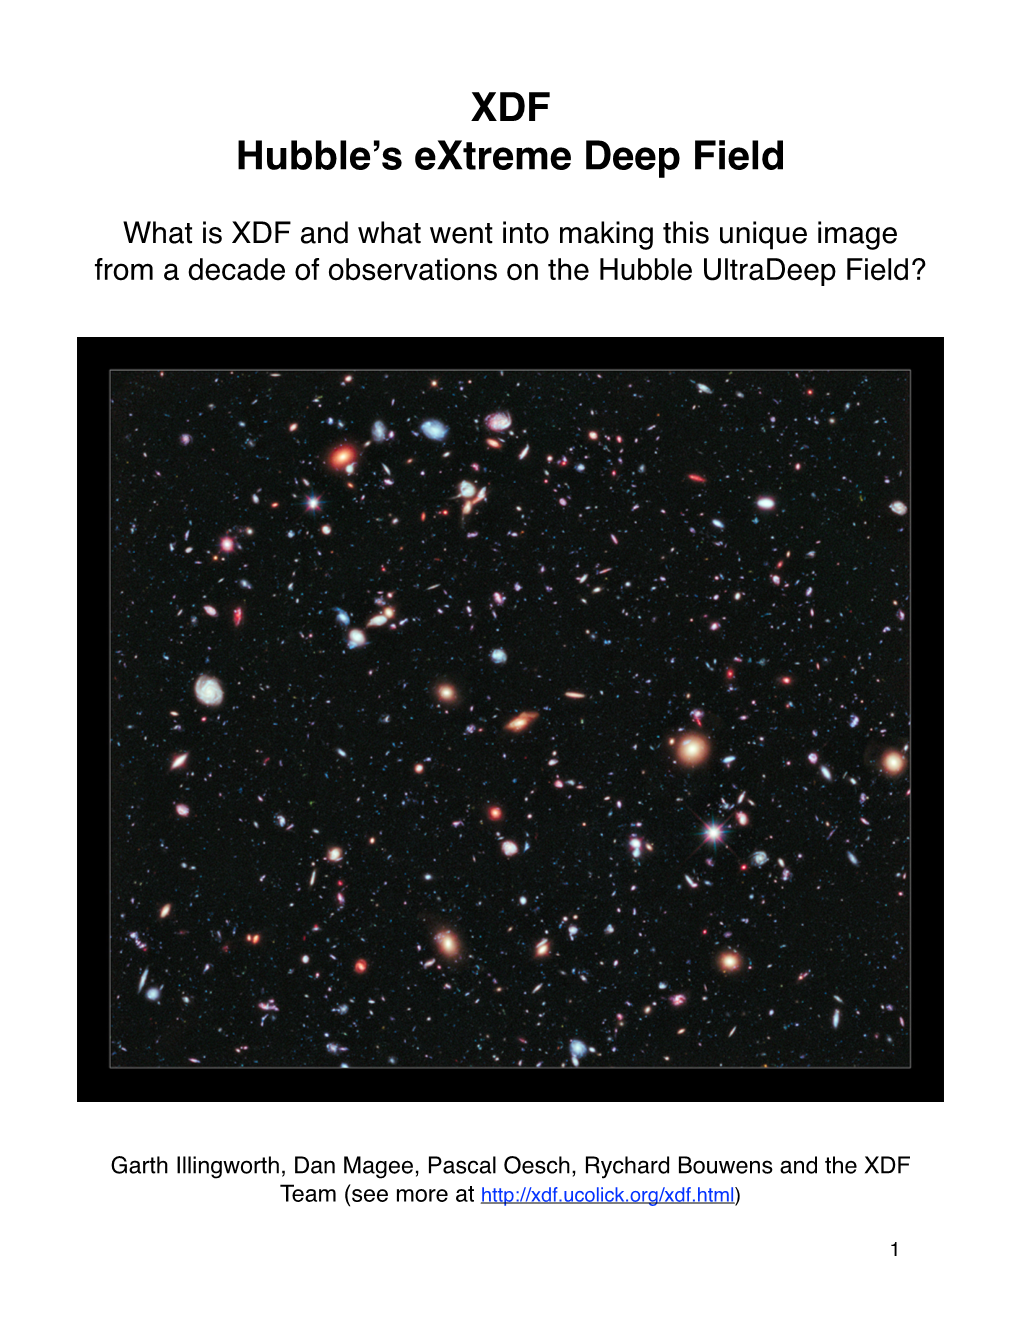 XDF Hubble's Extreme Deep Field